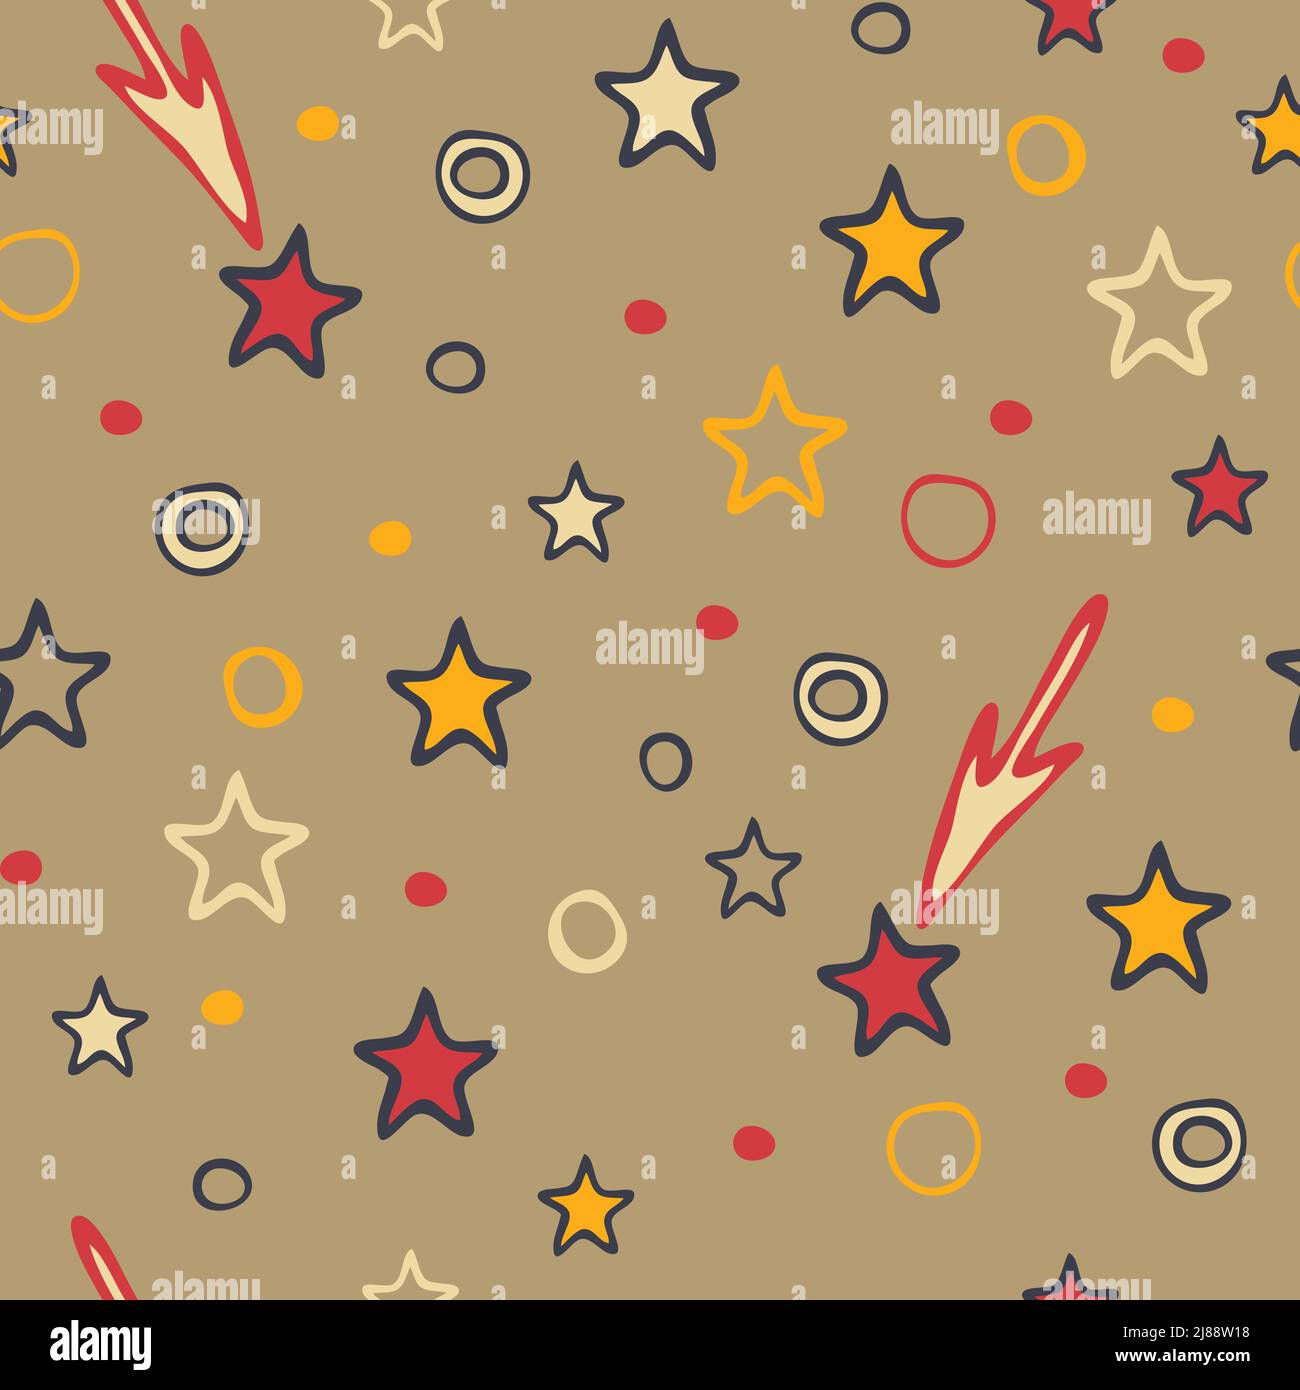 Seamless vector pattern with happy stars on beige background. Party celebration wallpaper design. Decorative star texture fashion textile. Stock Vector